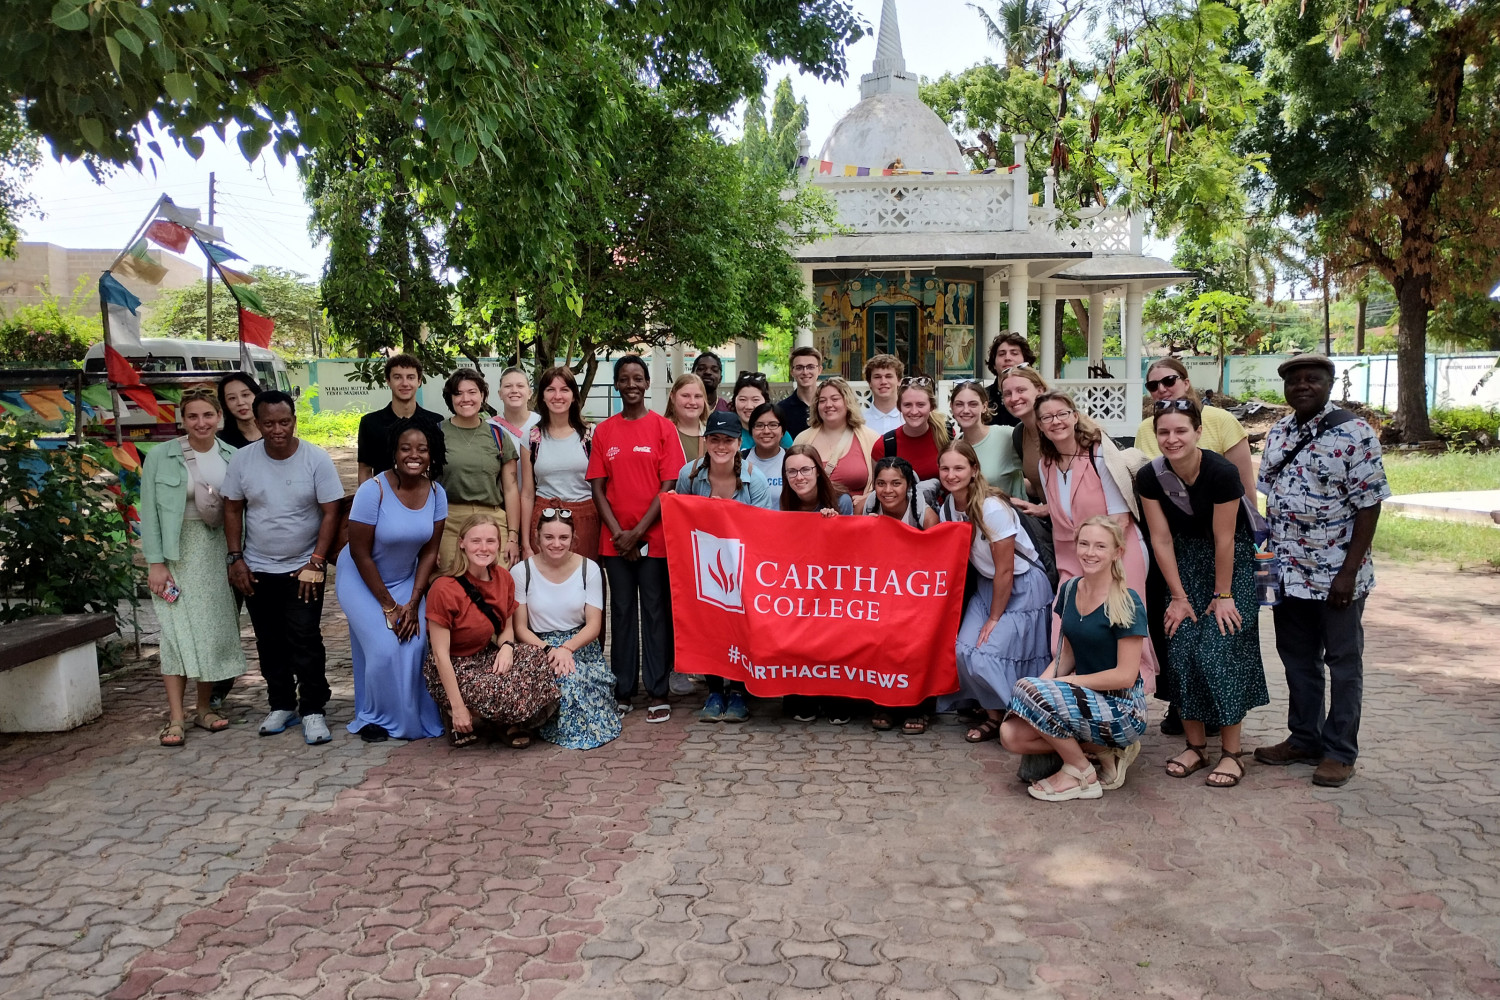 Carthage students on the study tour in Tanzania.